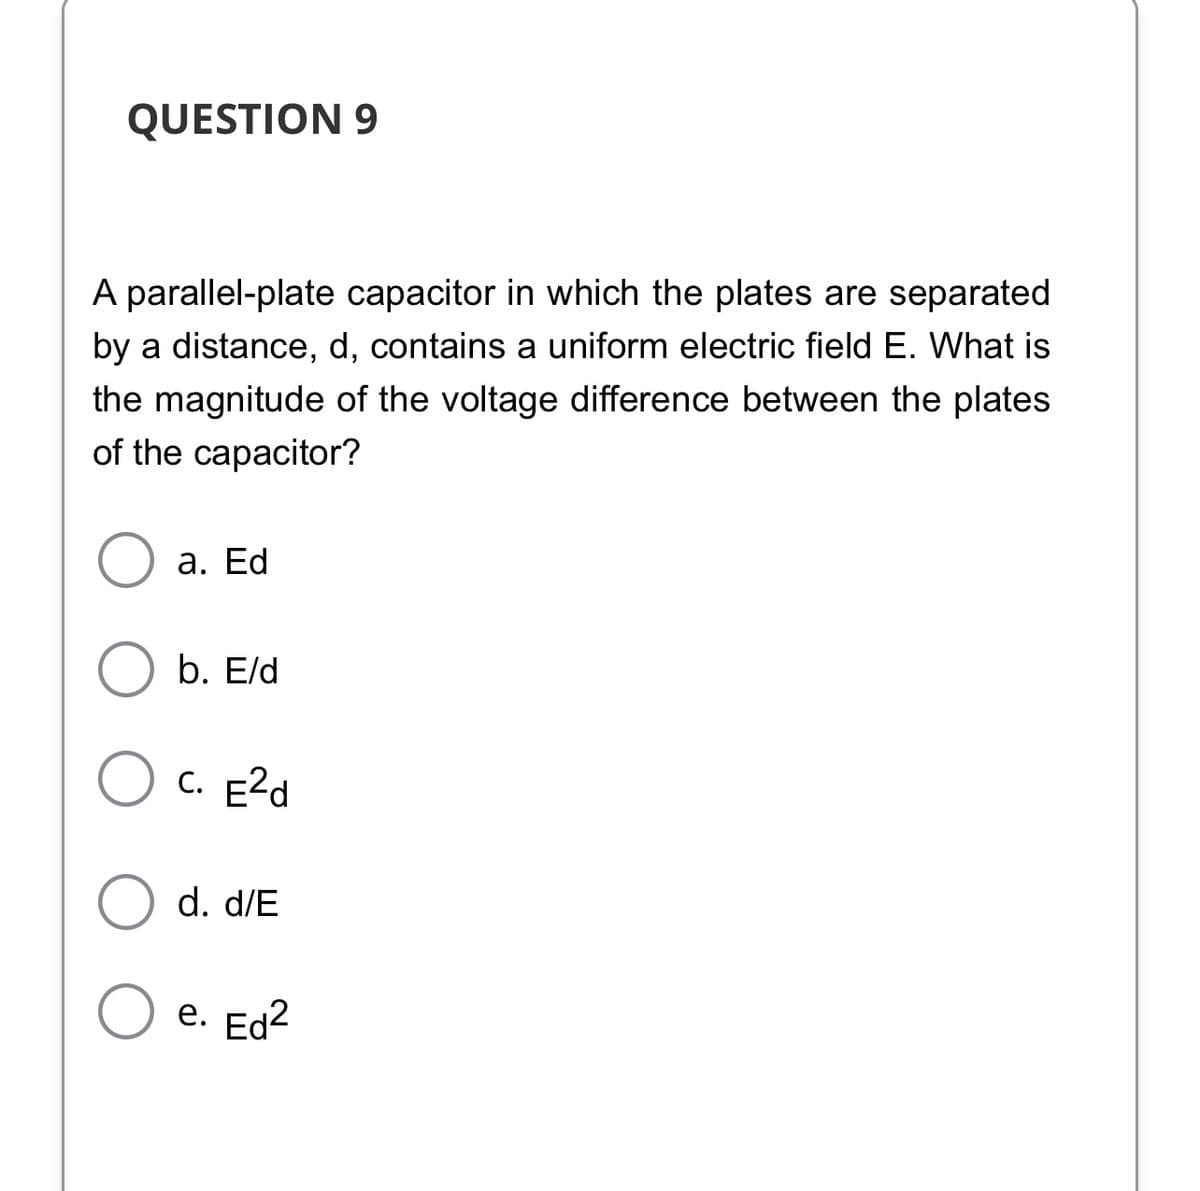 QUESTION 9
A parallel-plate capacitor in which the plates are separated
by a distance, d, contains a uniform electric field E. What is
the magnitude of the voltage difference between the plates
of the capacitor?
а. Ed
b. Eld
C. E2d
d. d/E
е. Ed2
